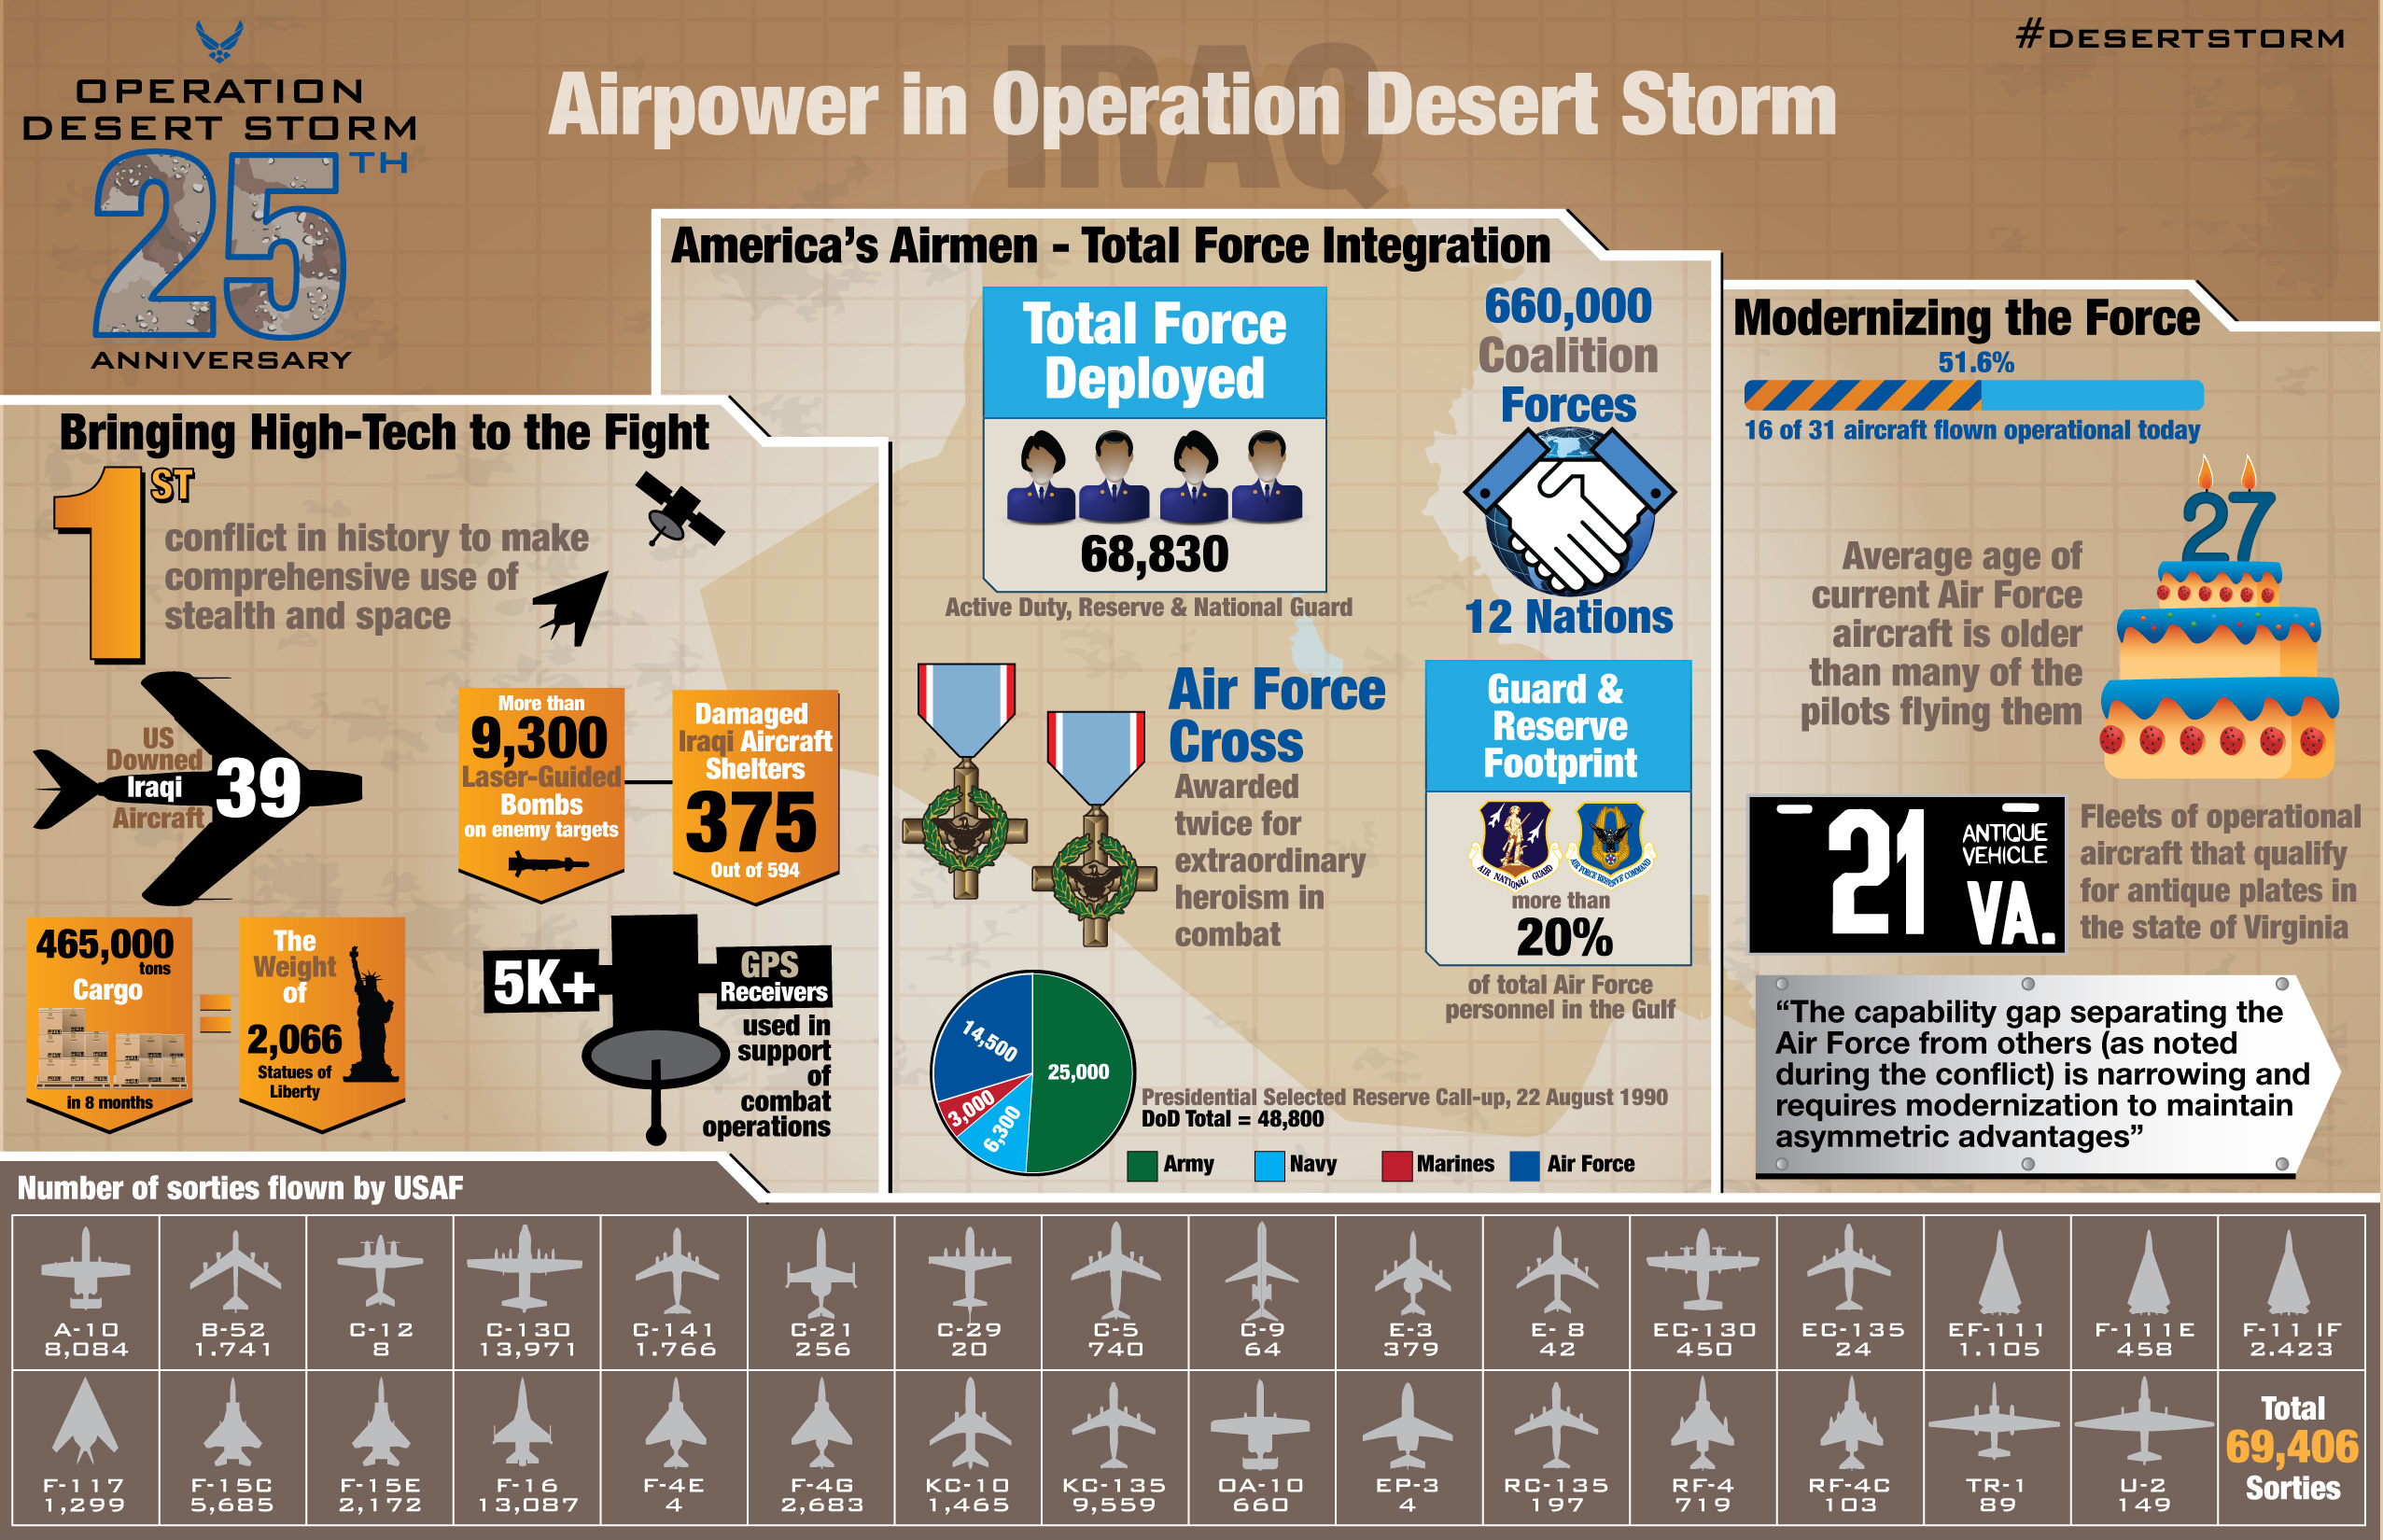 This Infographic Sums Up the USAF contribution to Operation Desert